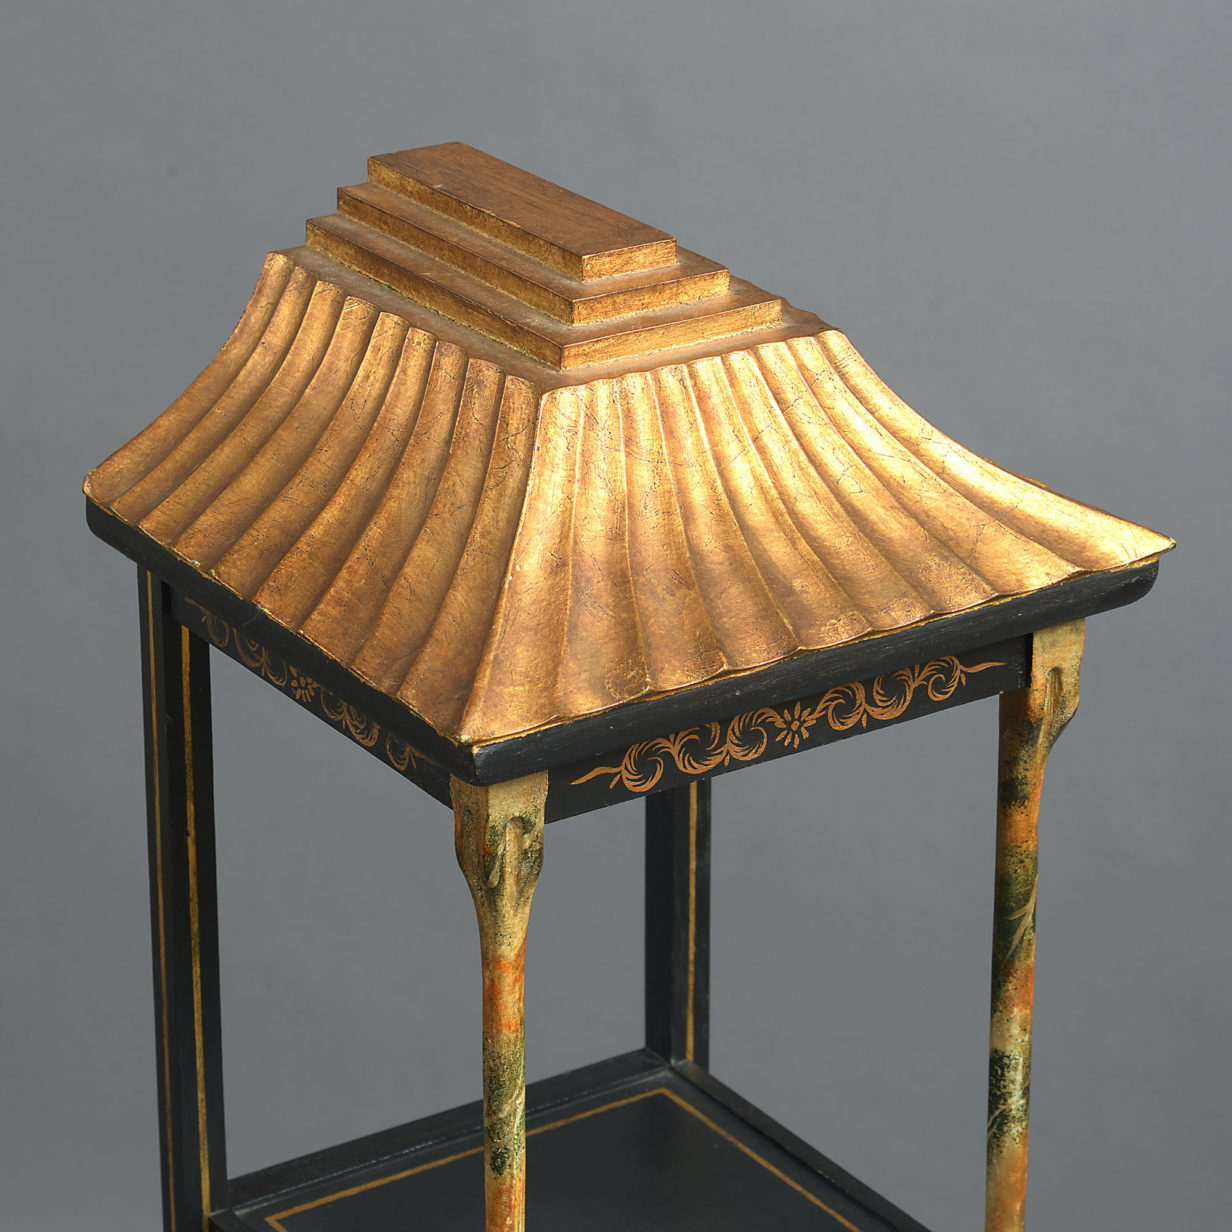 A 20th century set of chinoiserie pagoda shelves